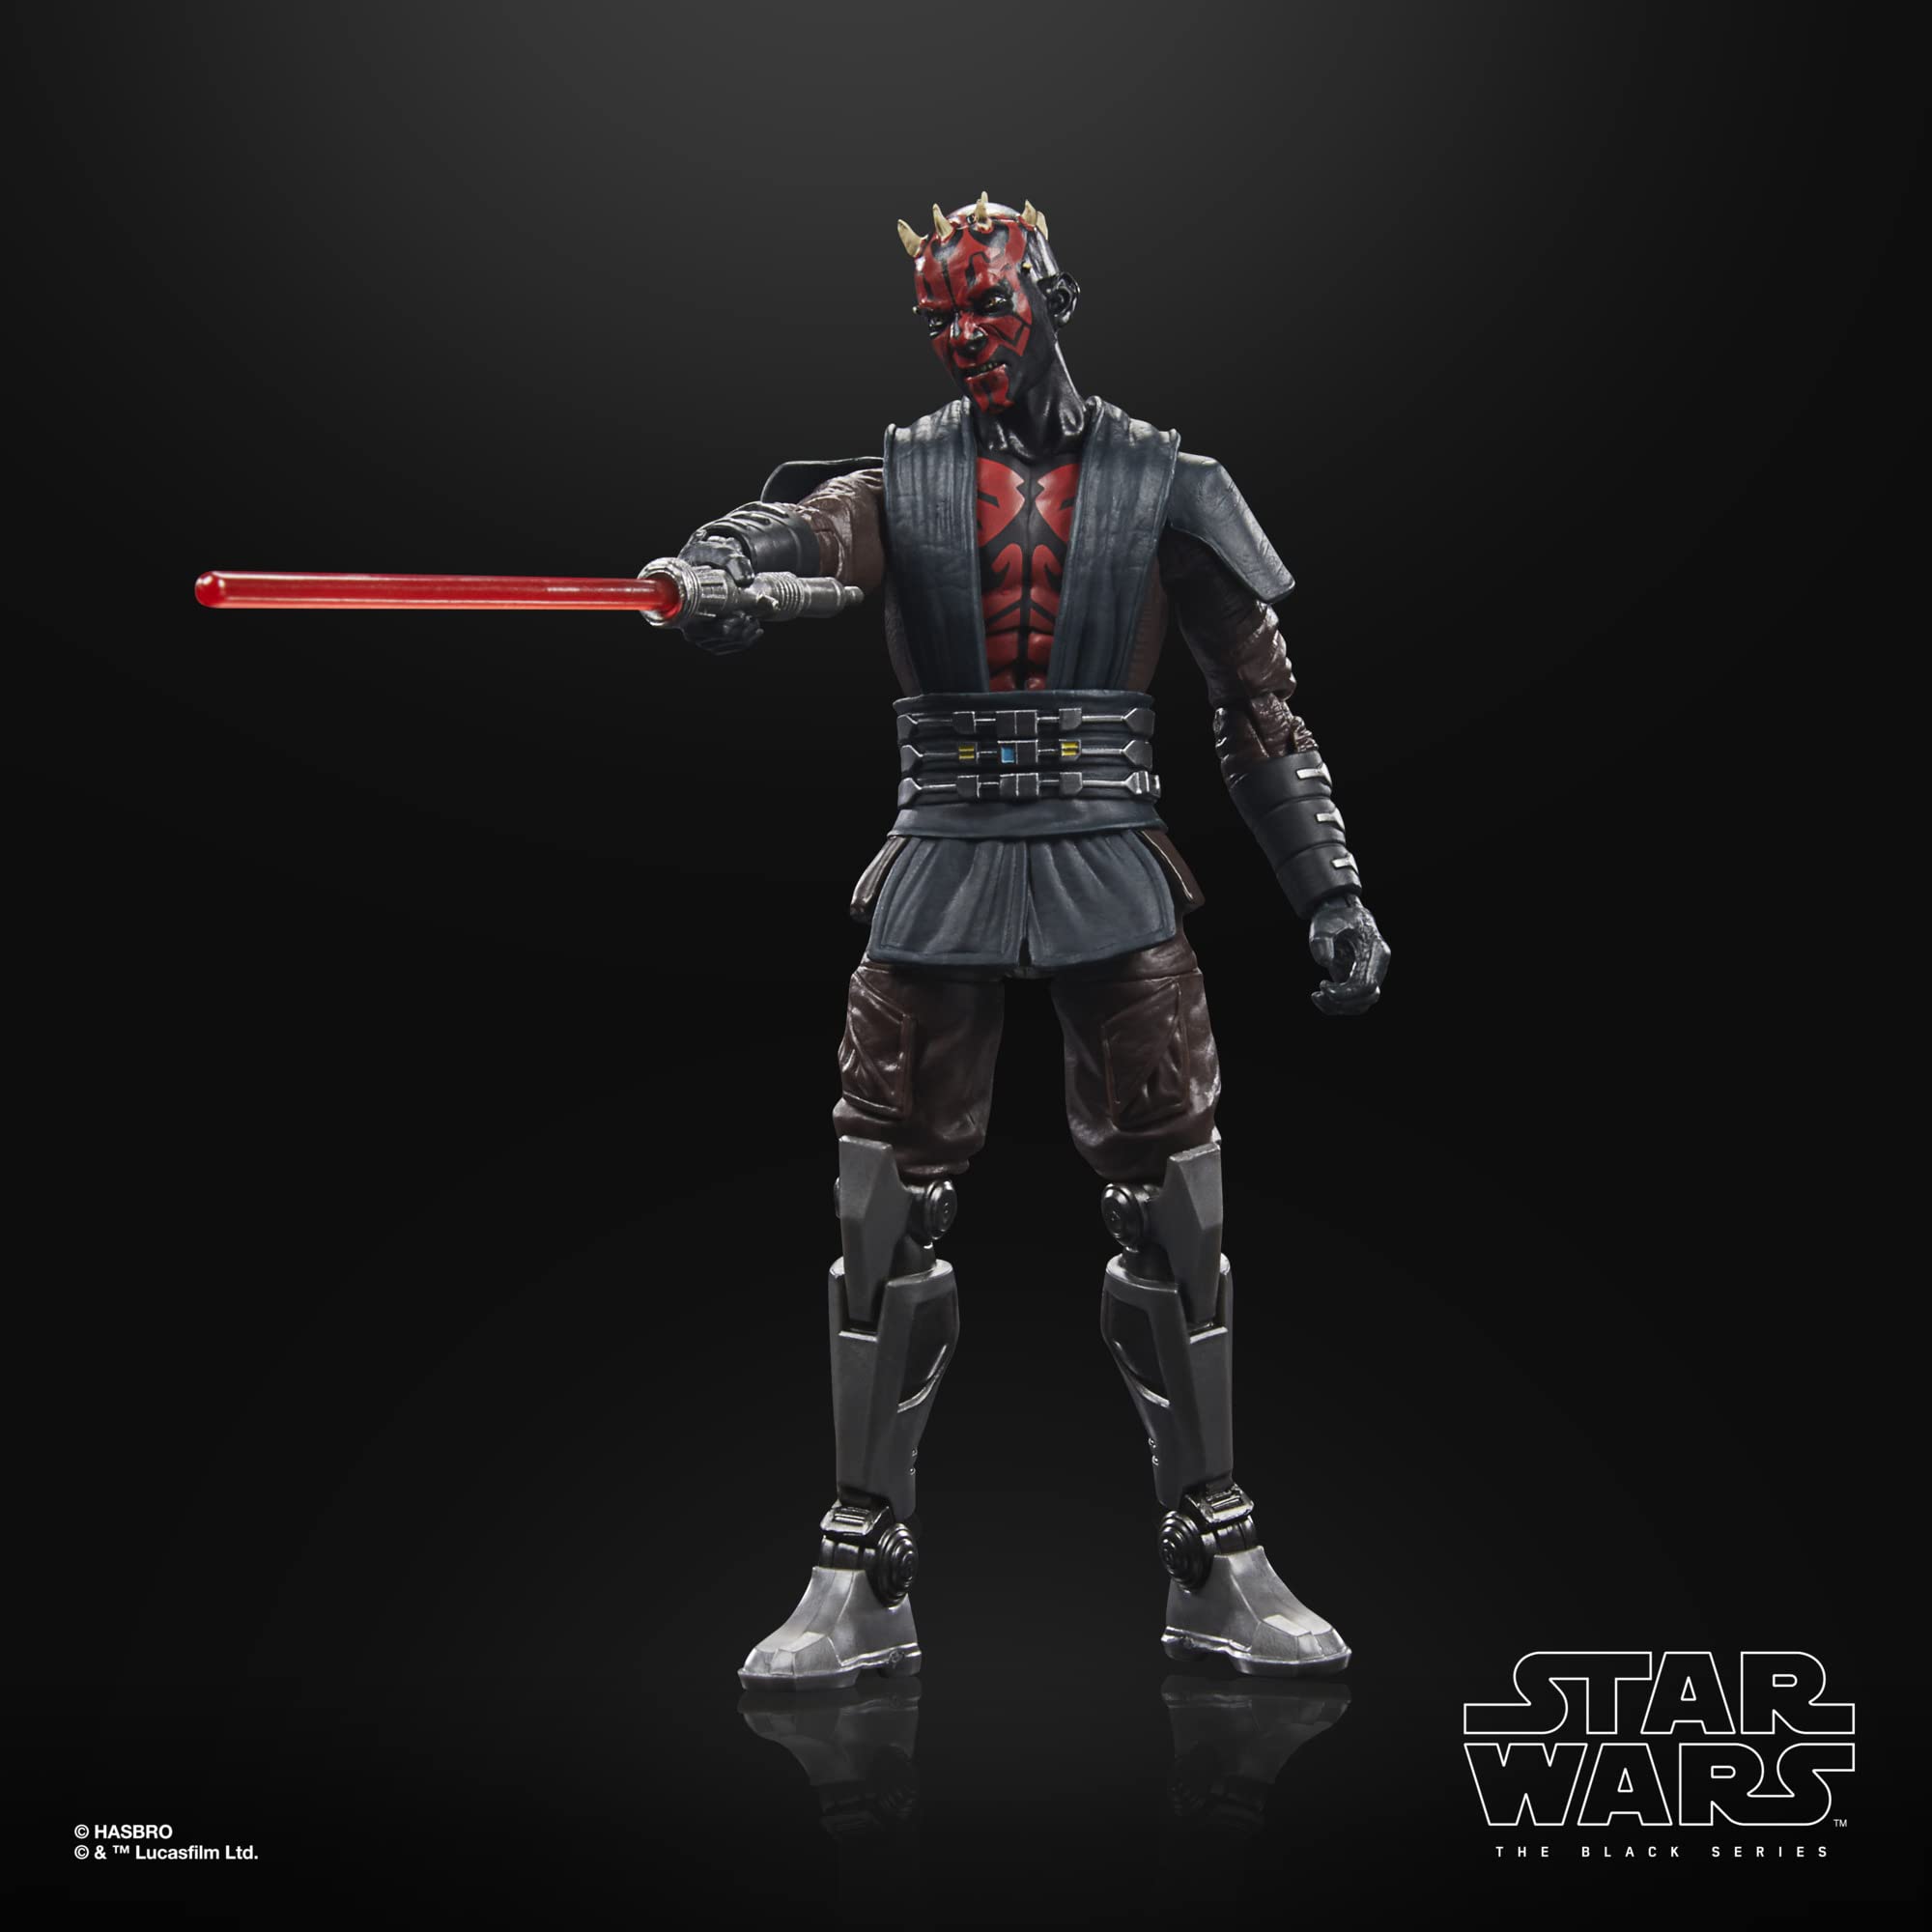 STAR WARS The Black Series Darth Maul Toy 6-Inch-Scale The Clone Wars Collectible Action Figure, Toys for Kids Ages 4 and Up